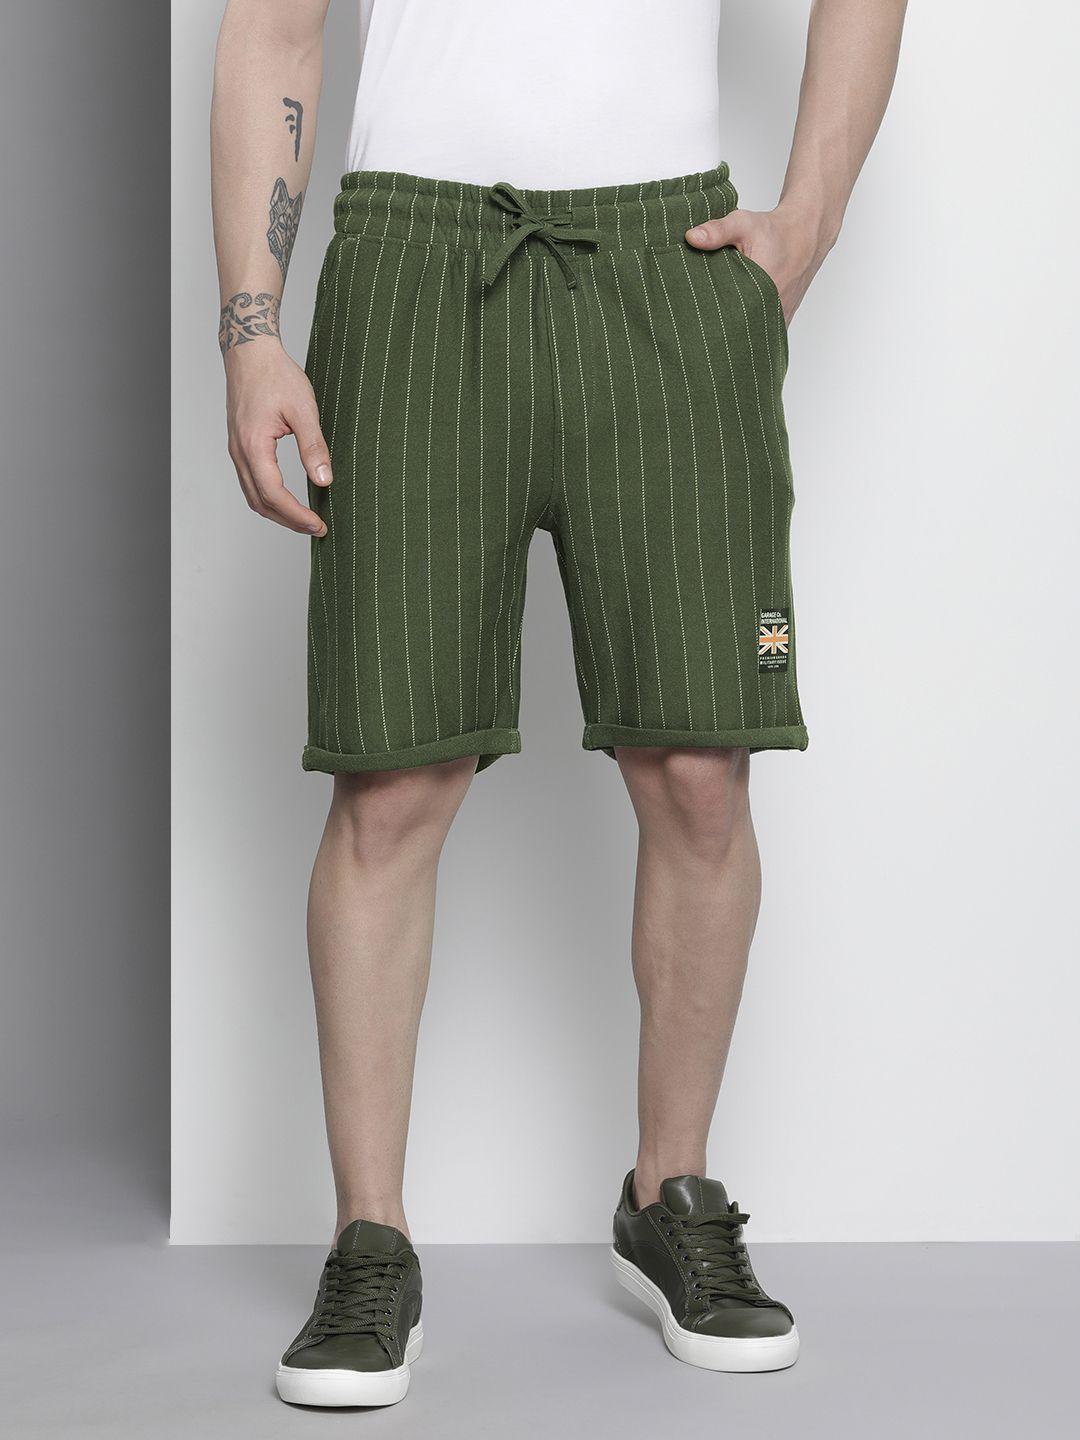 the-indian-garage-co-men-olive-green-striped-shorts